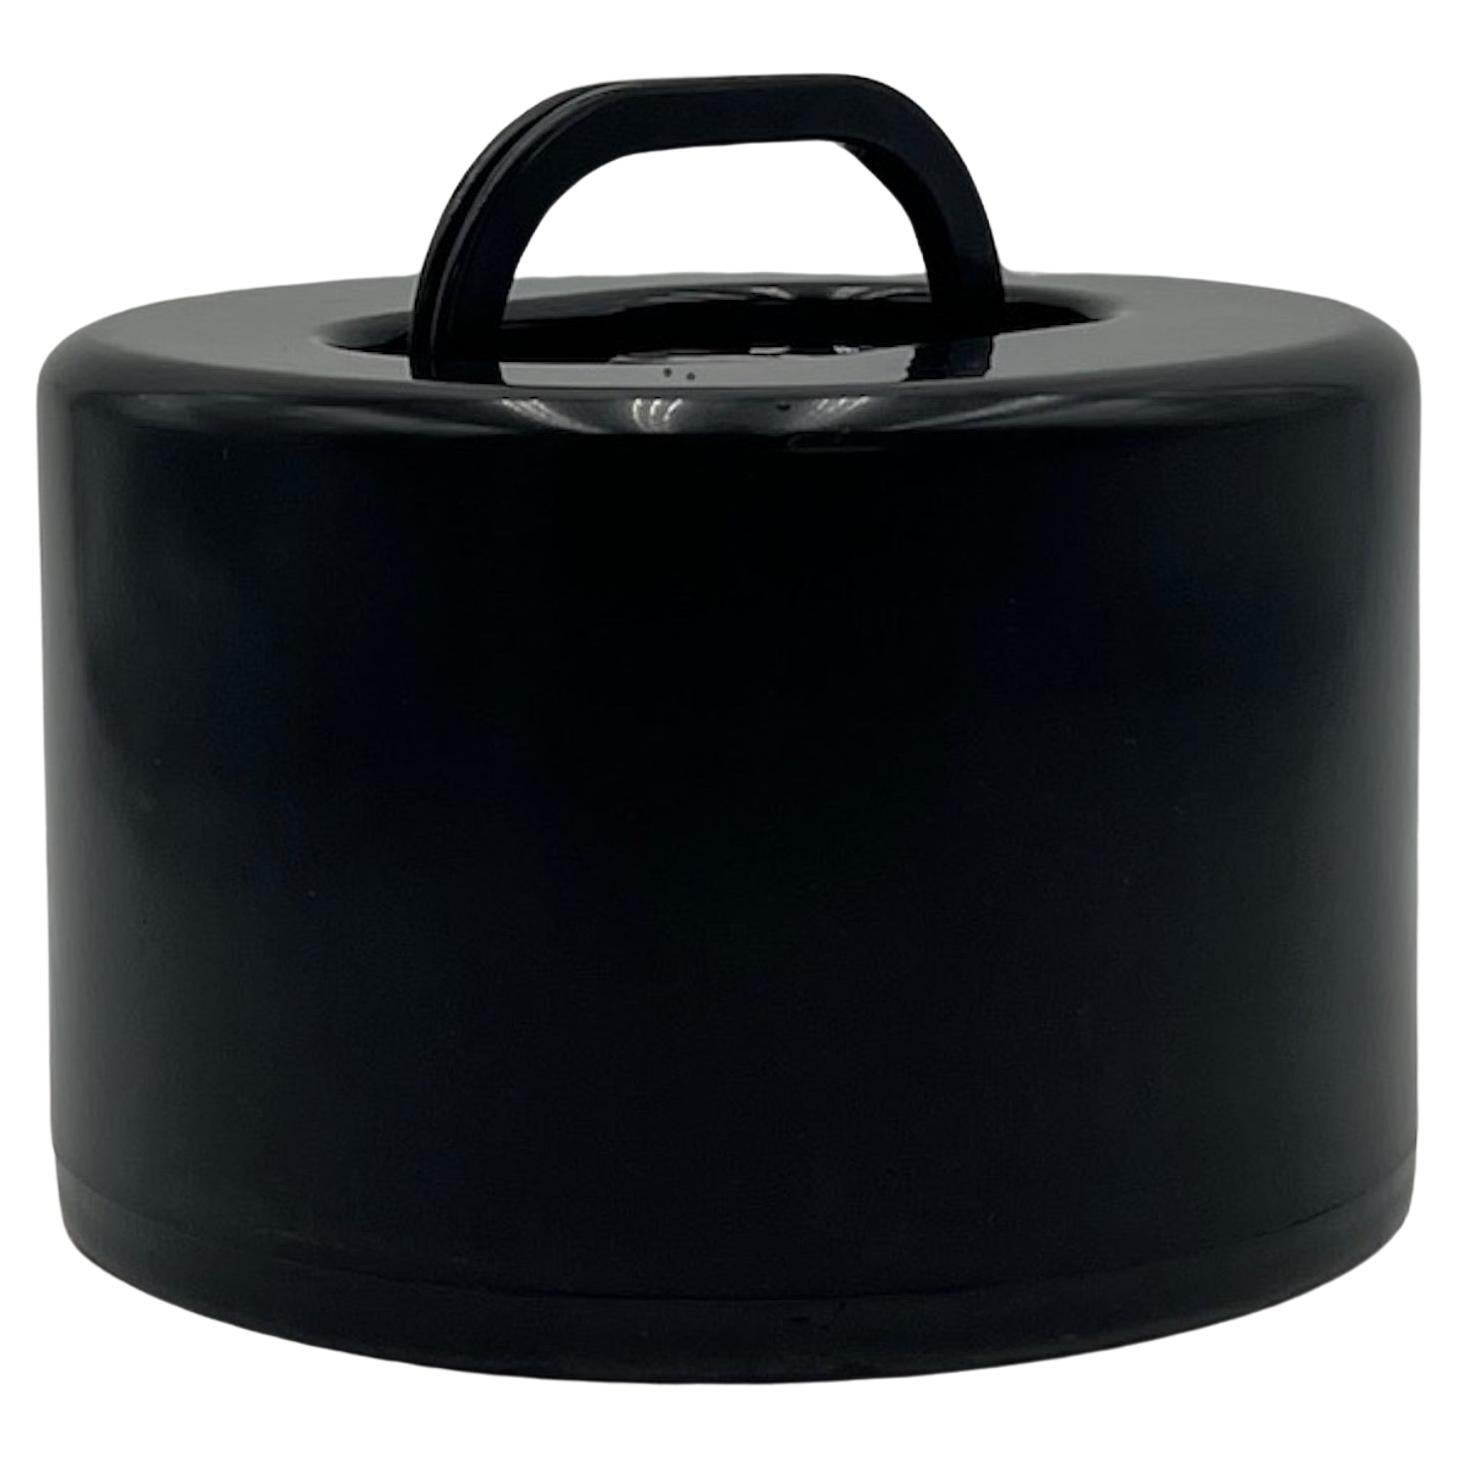 Lovely and rare plastic disc holder designed by Olaf Von Bohr and produced by Kartell.

This rare vintage piece is made of high density plastic. The black color is the perfect match for the 45 RPM discs that can be stored in this container. The